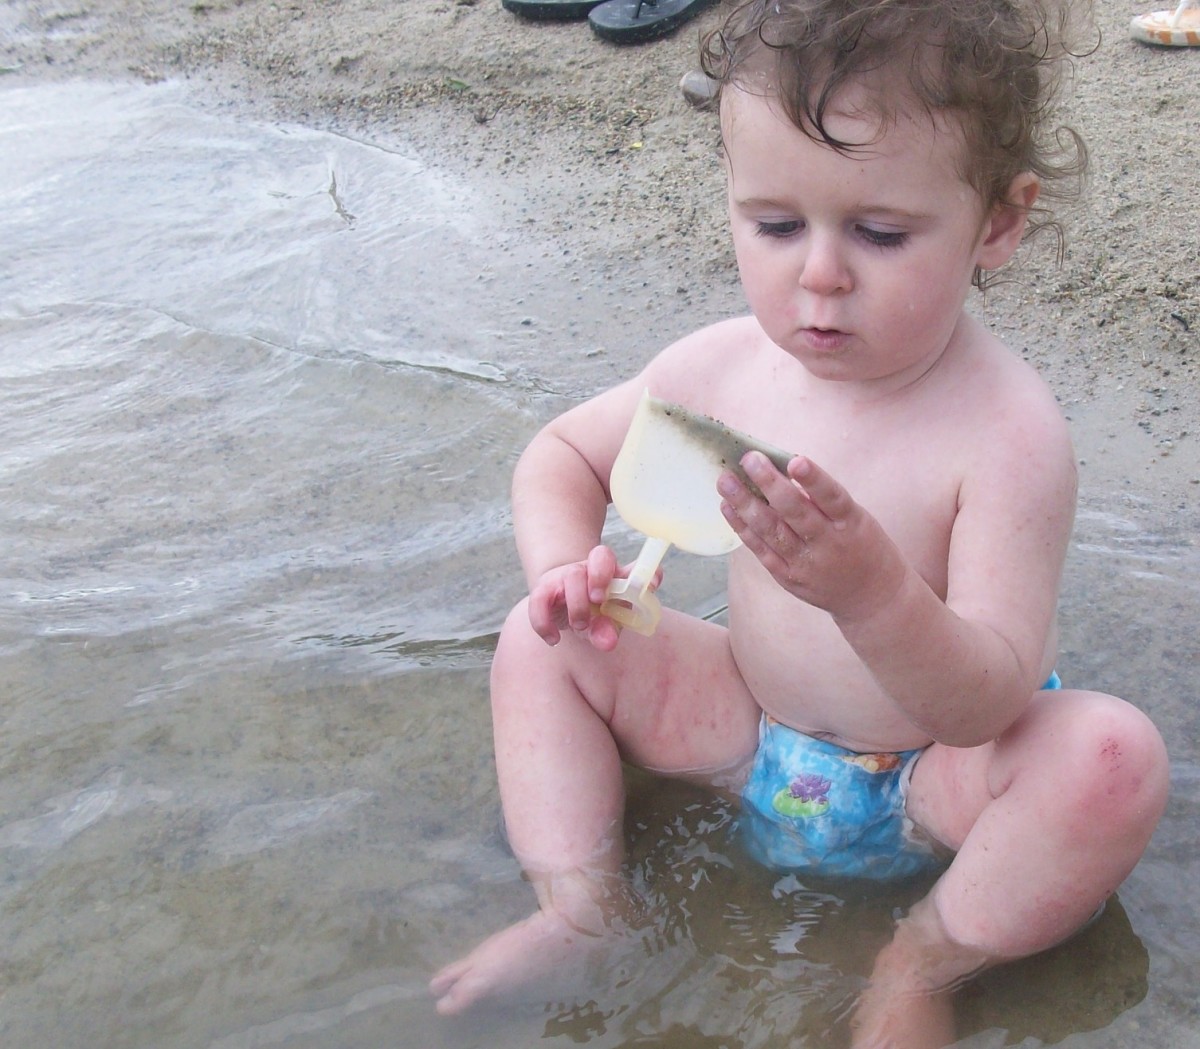 No, son, that's NOT the sand I want!